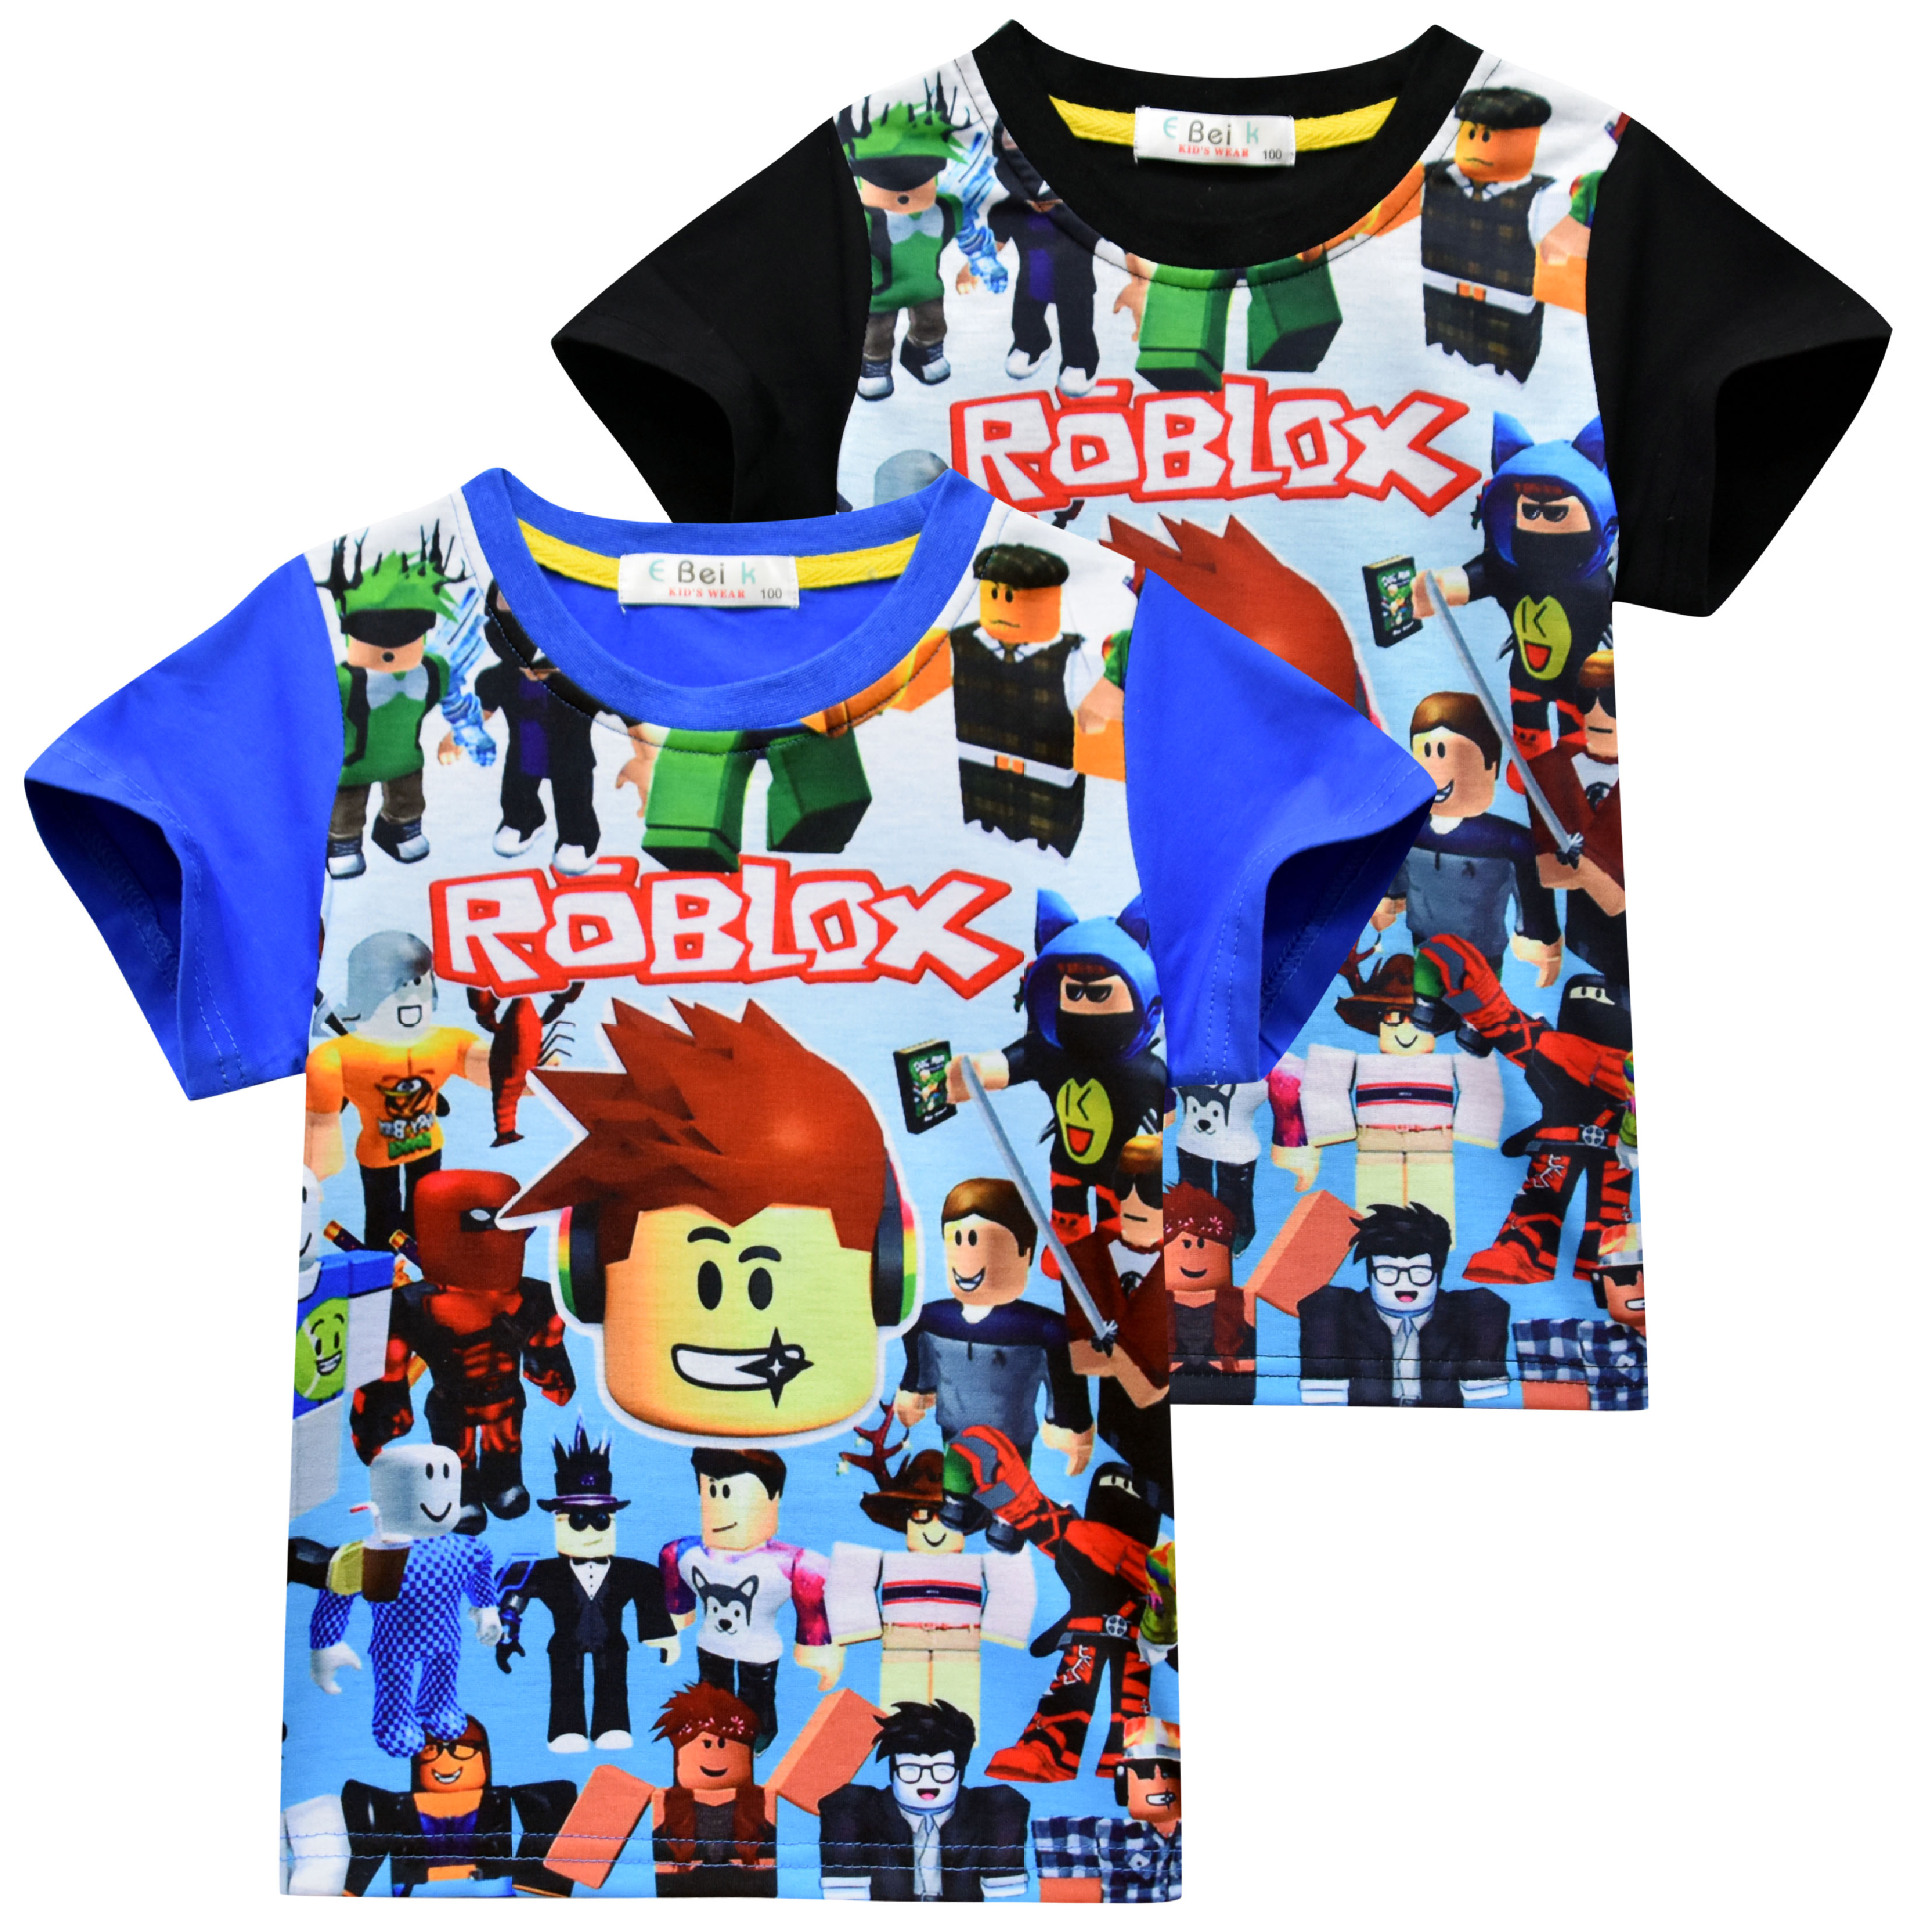 Cross Border Exclusively For Roblox Cartoon Game Children S Short Sleeved Children S T Shirt Big Boy S T Shirt Top Shopee Philippines - cross the border roblox game